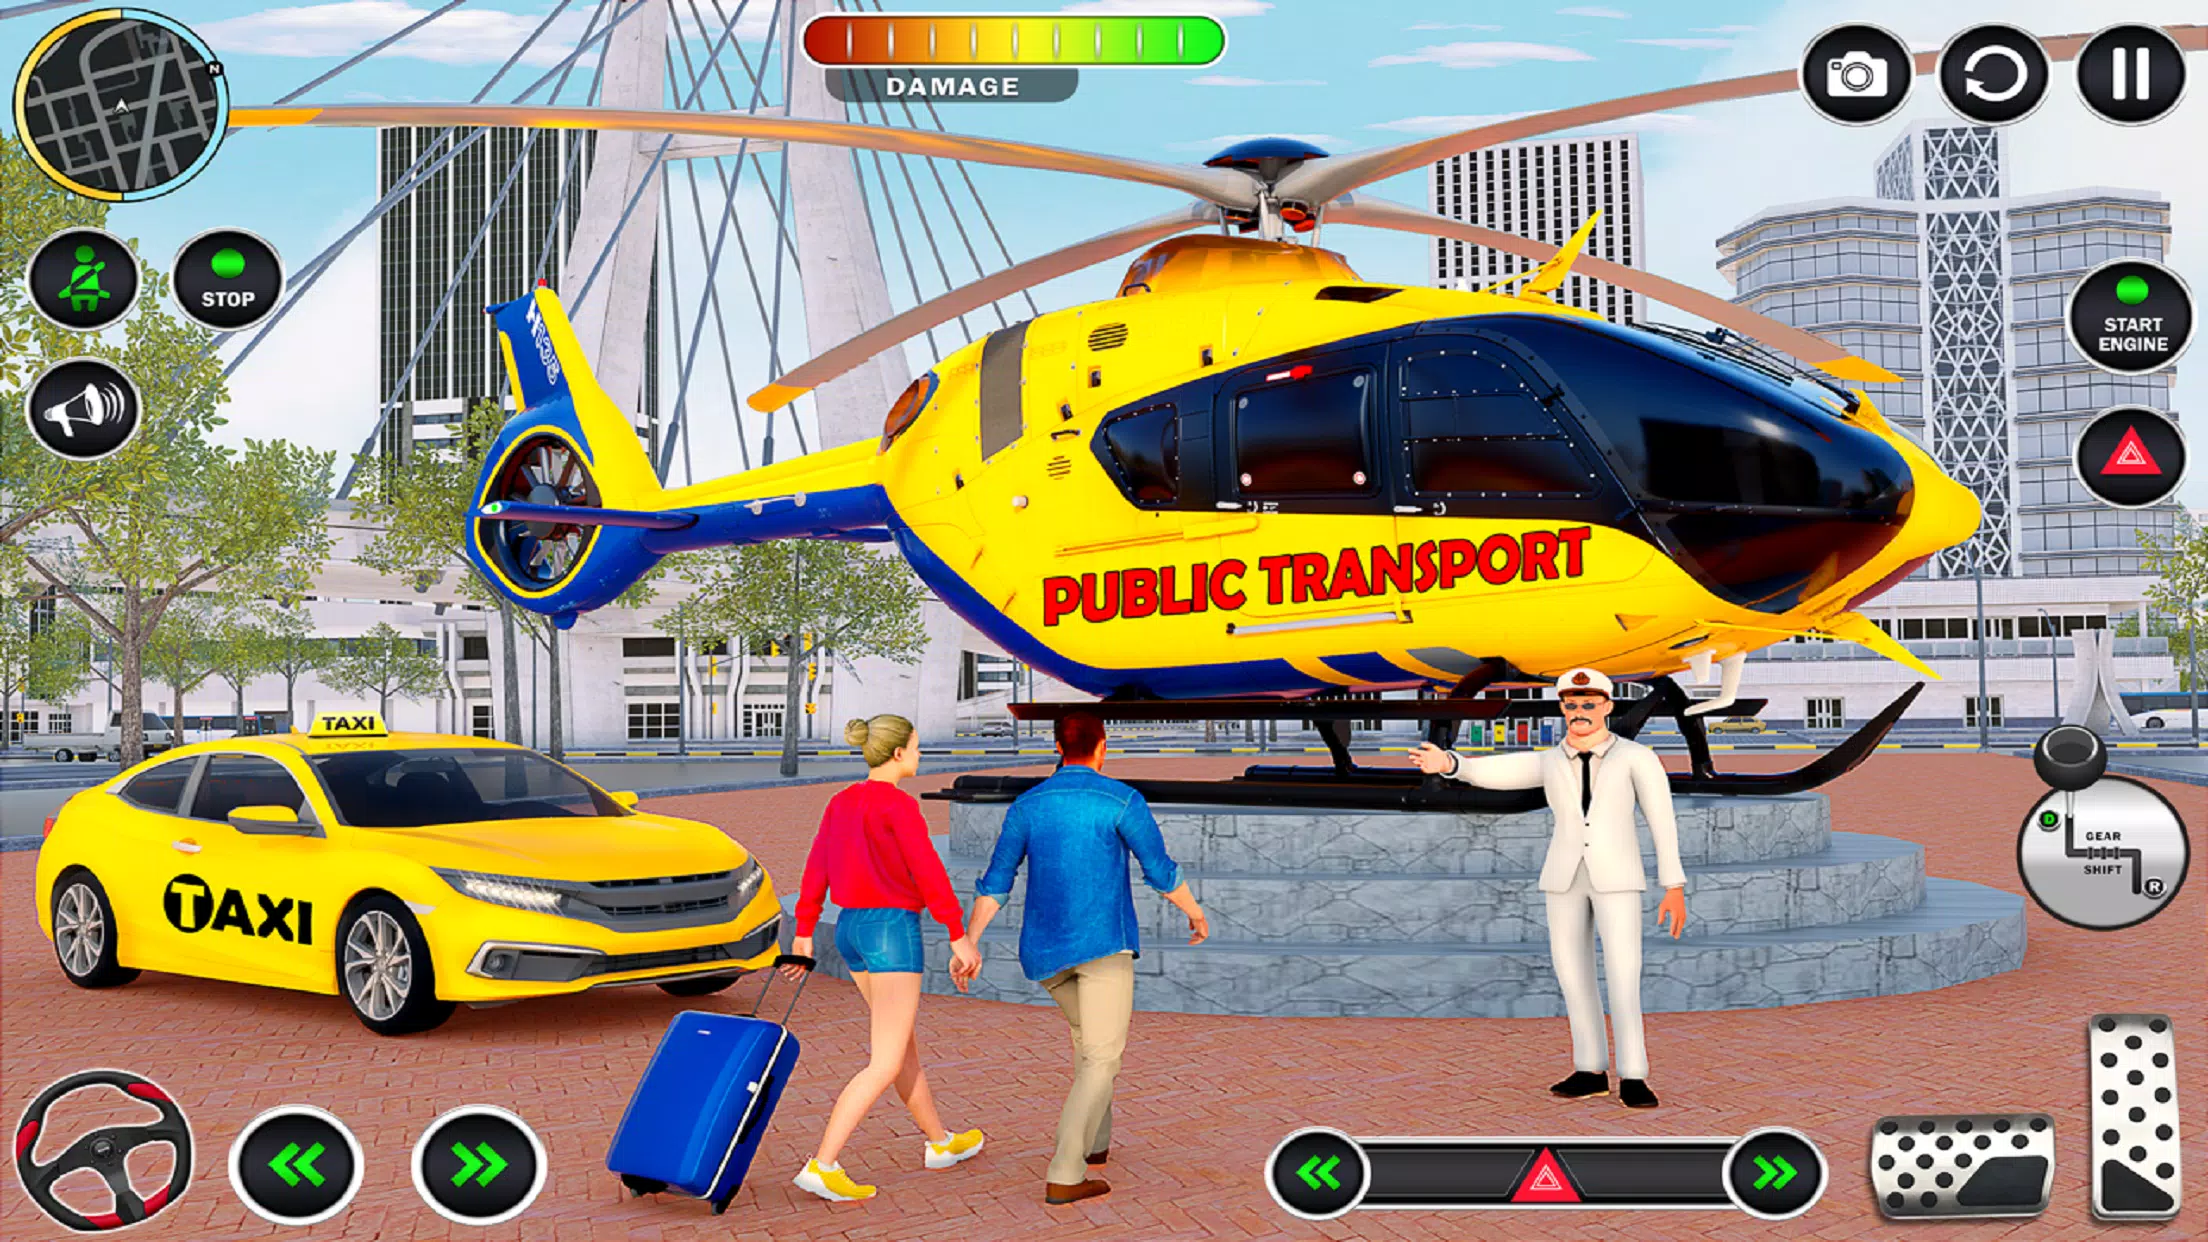 Advertise on Car Driving School Simulator Android App - ADspot